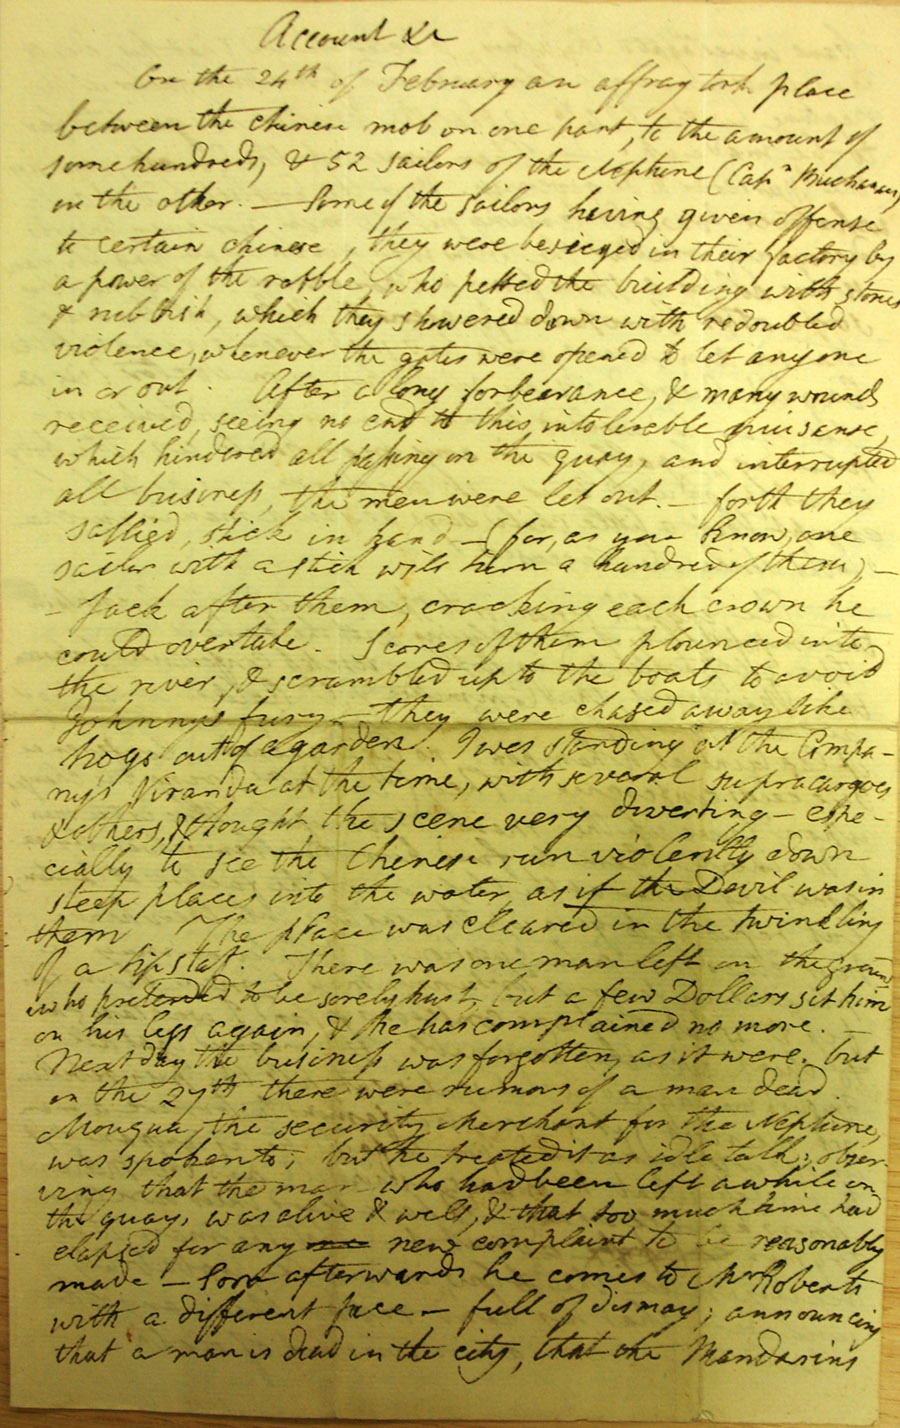 Account of the riot in Canton involving the sailors of the Neptune, 24 February 1807 (TM/1/1/40)